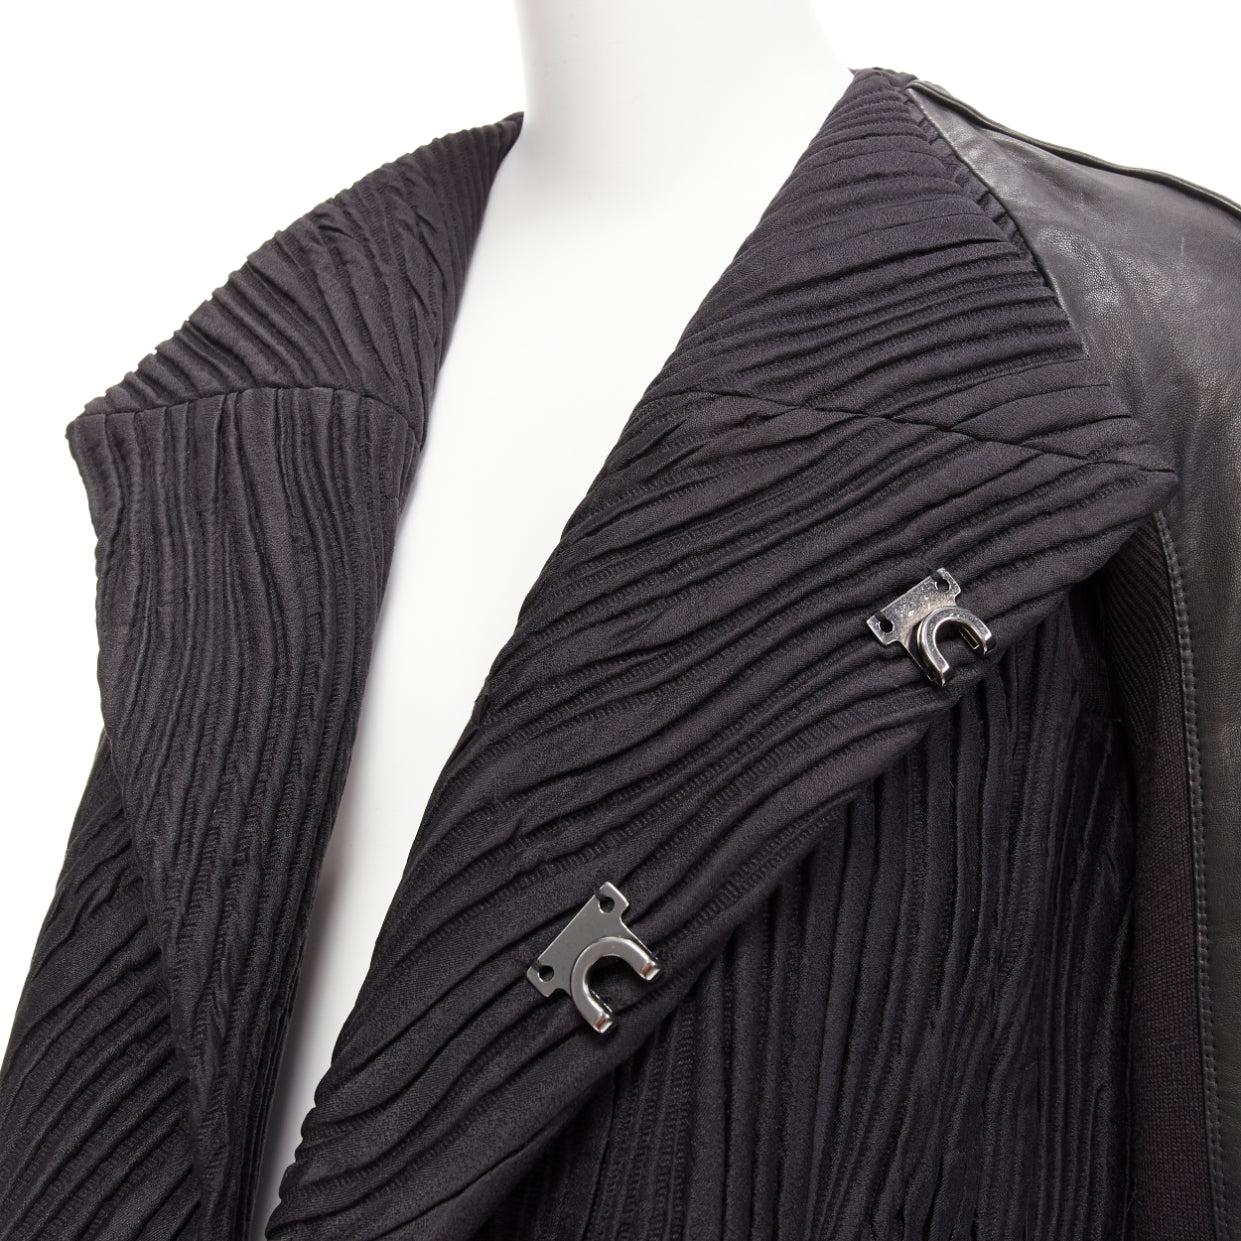 RICK OWENS black leather sleeves textured quilted silk wrap jacket IT40 S
Reference: SSLG/A00002
Brand: Rick Owens
Designer: Rick Owens
Material: Wool, Leather, Fabric
Color: Black
Pattern: Solid
Closure: Hook & Bar
Lining: Black Fabric
Extra